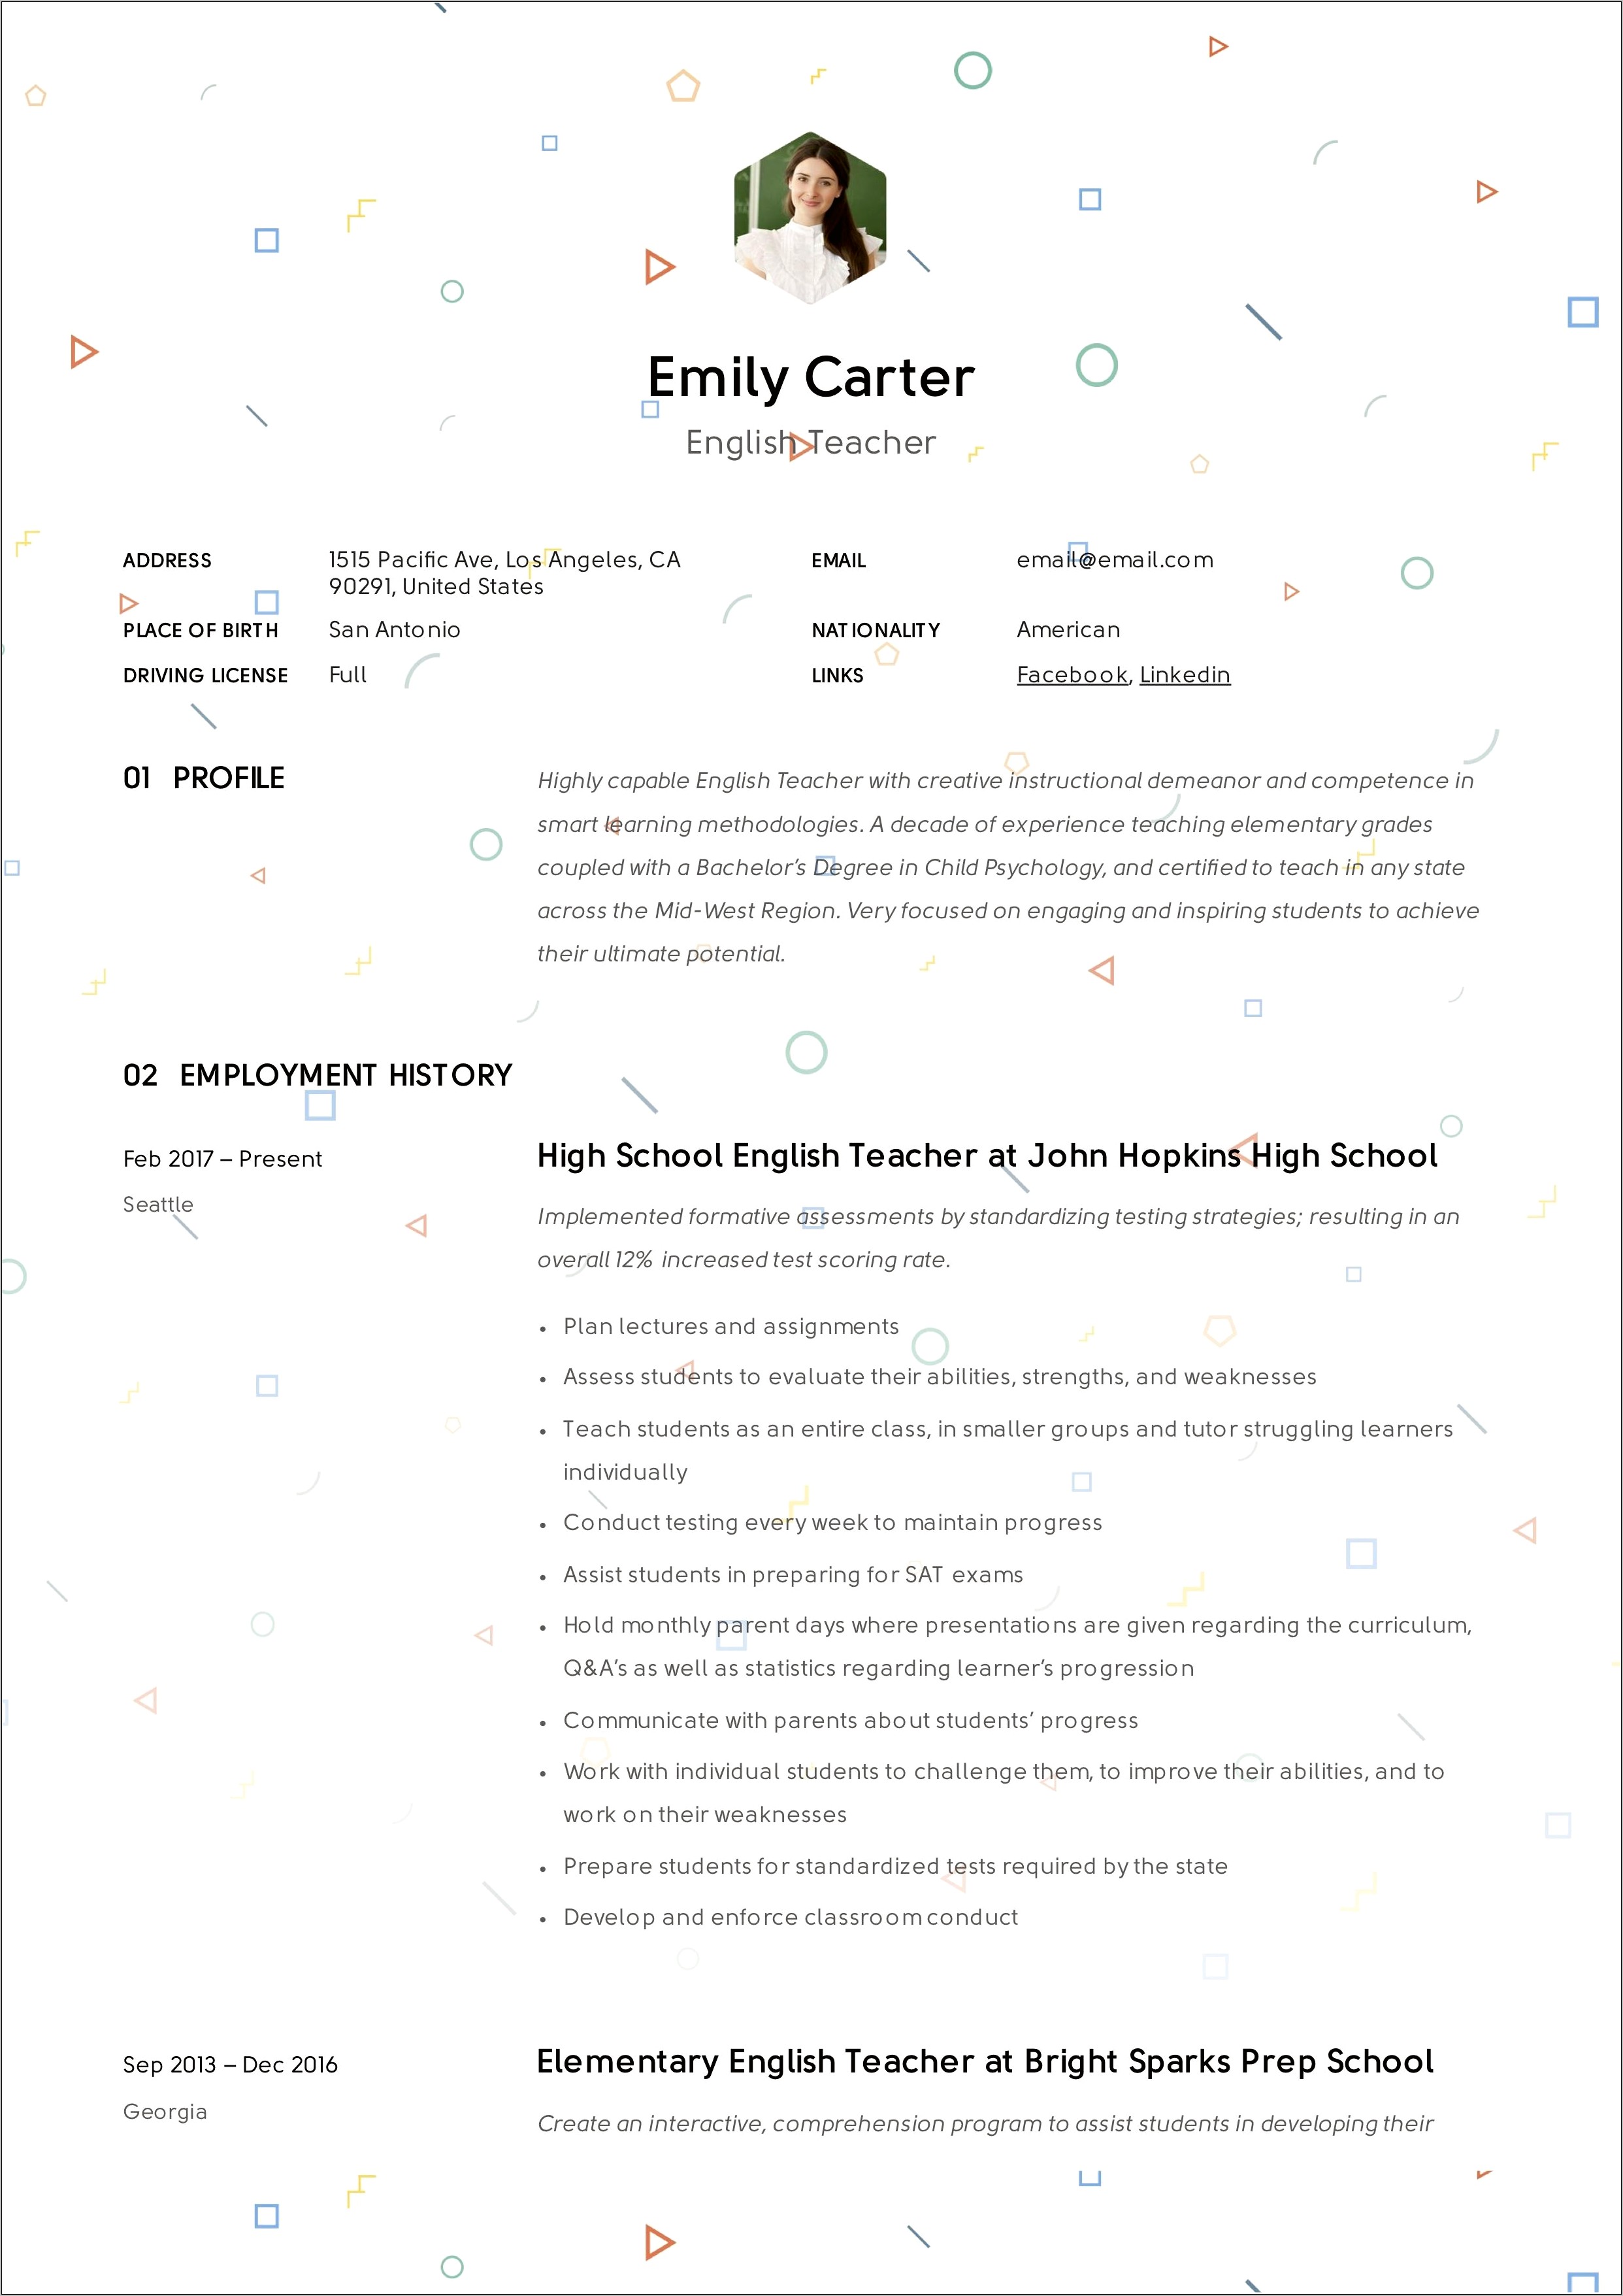 Examples Of Simple Resumes For Jobs.pdf